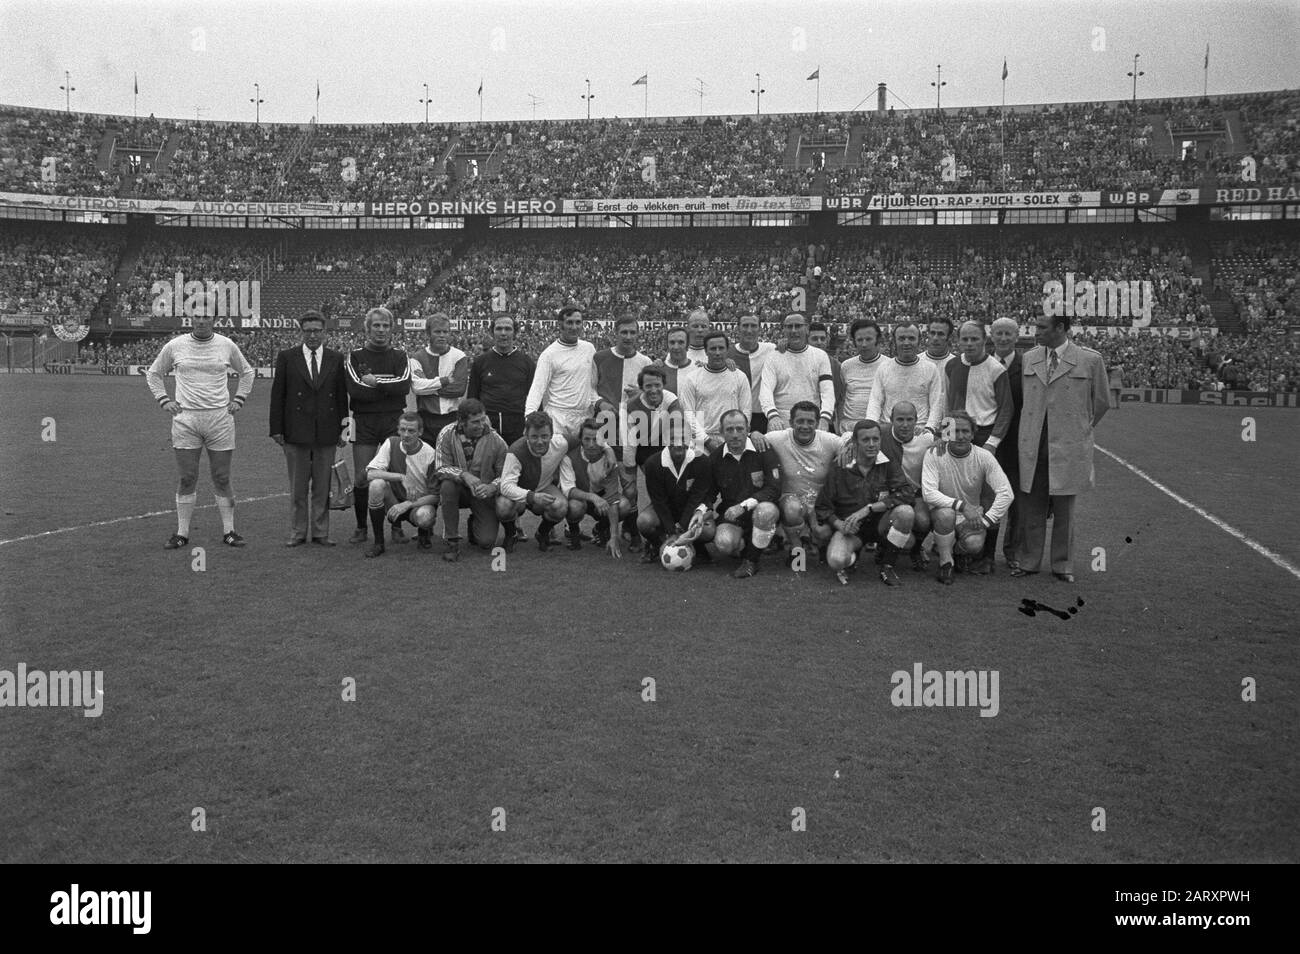 Farewell of Feyenoord footballer Coen Moulijn during a match against Uruguay  Practical match between former Feyenoord and former internationals (in white) Date: June 9, 1972 Keywords: tributes, sports, football Stock Photo